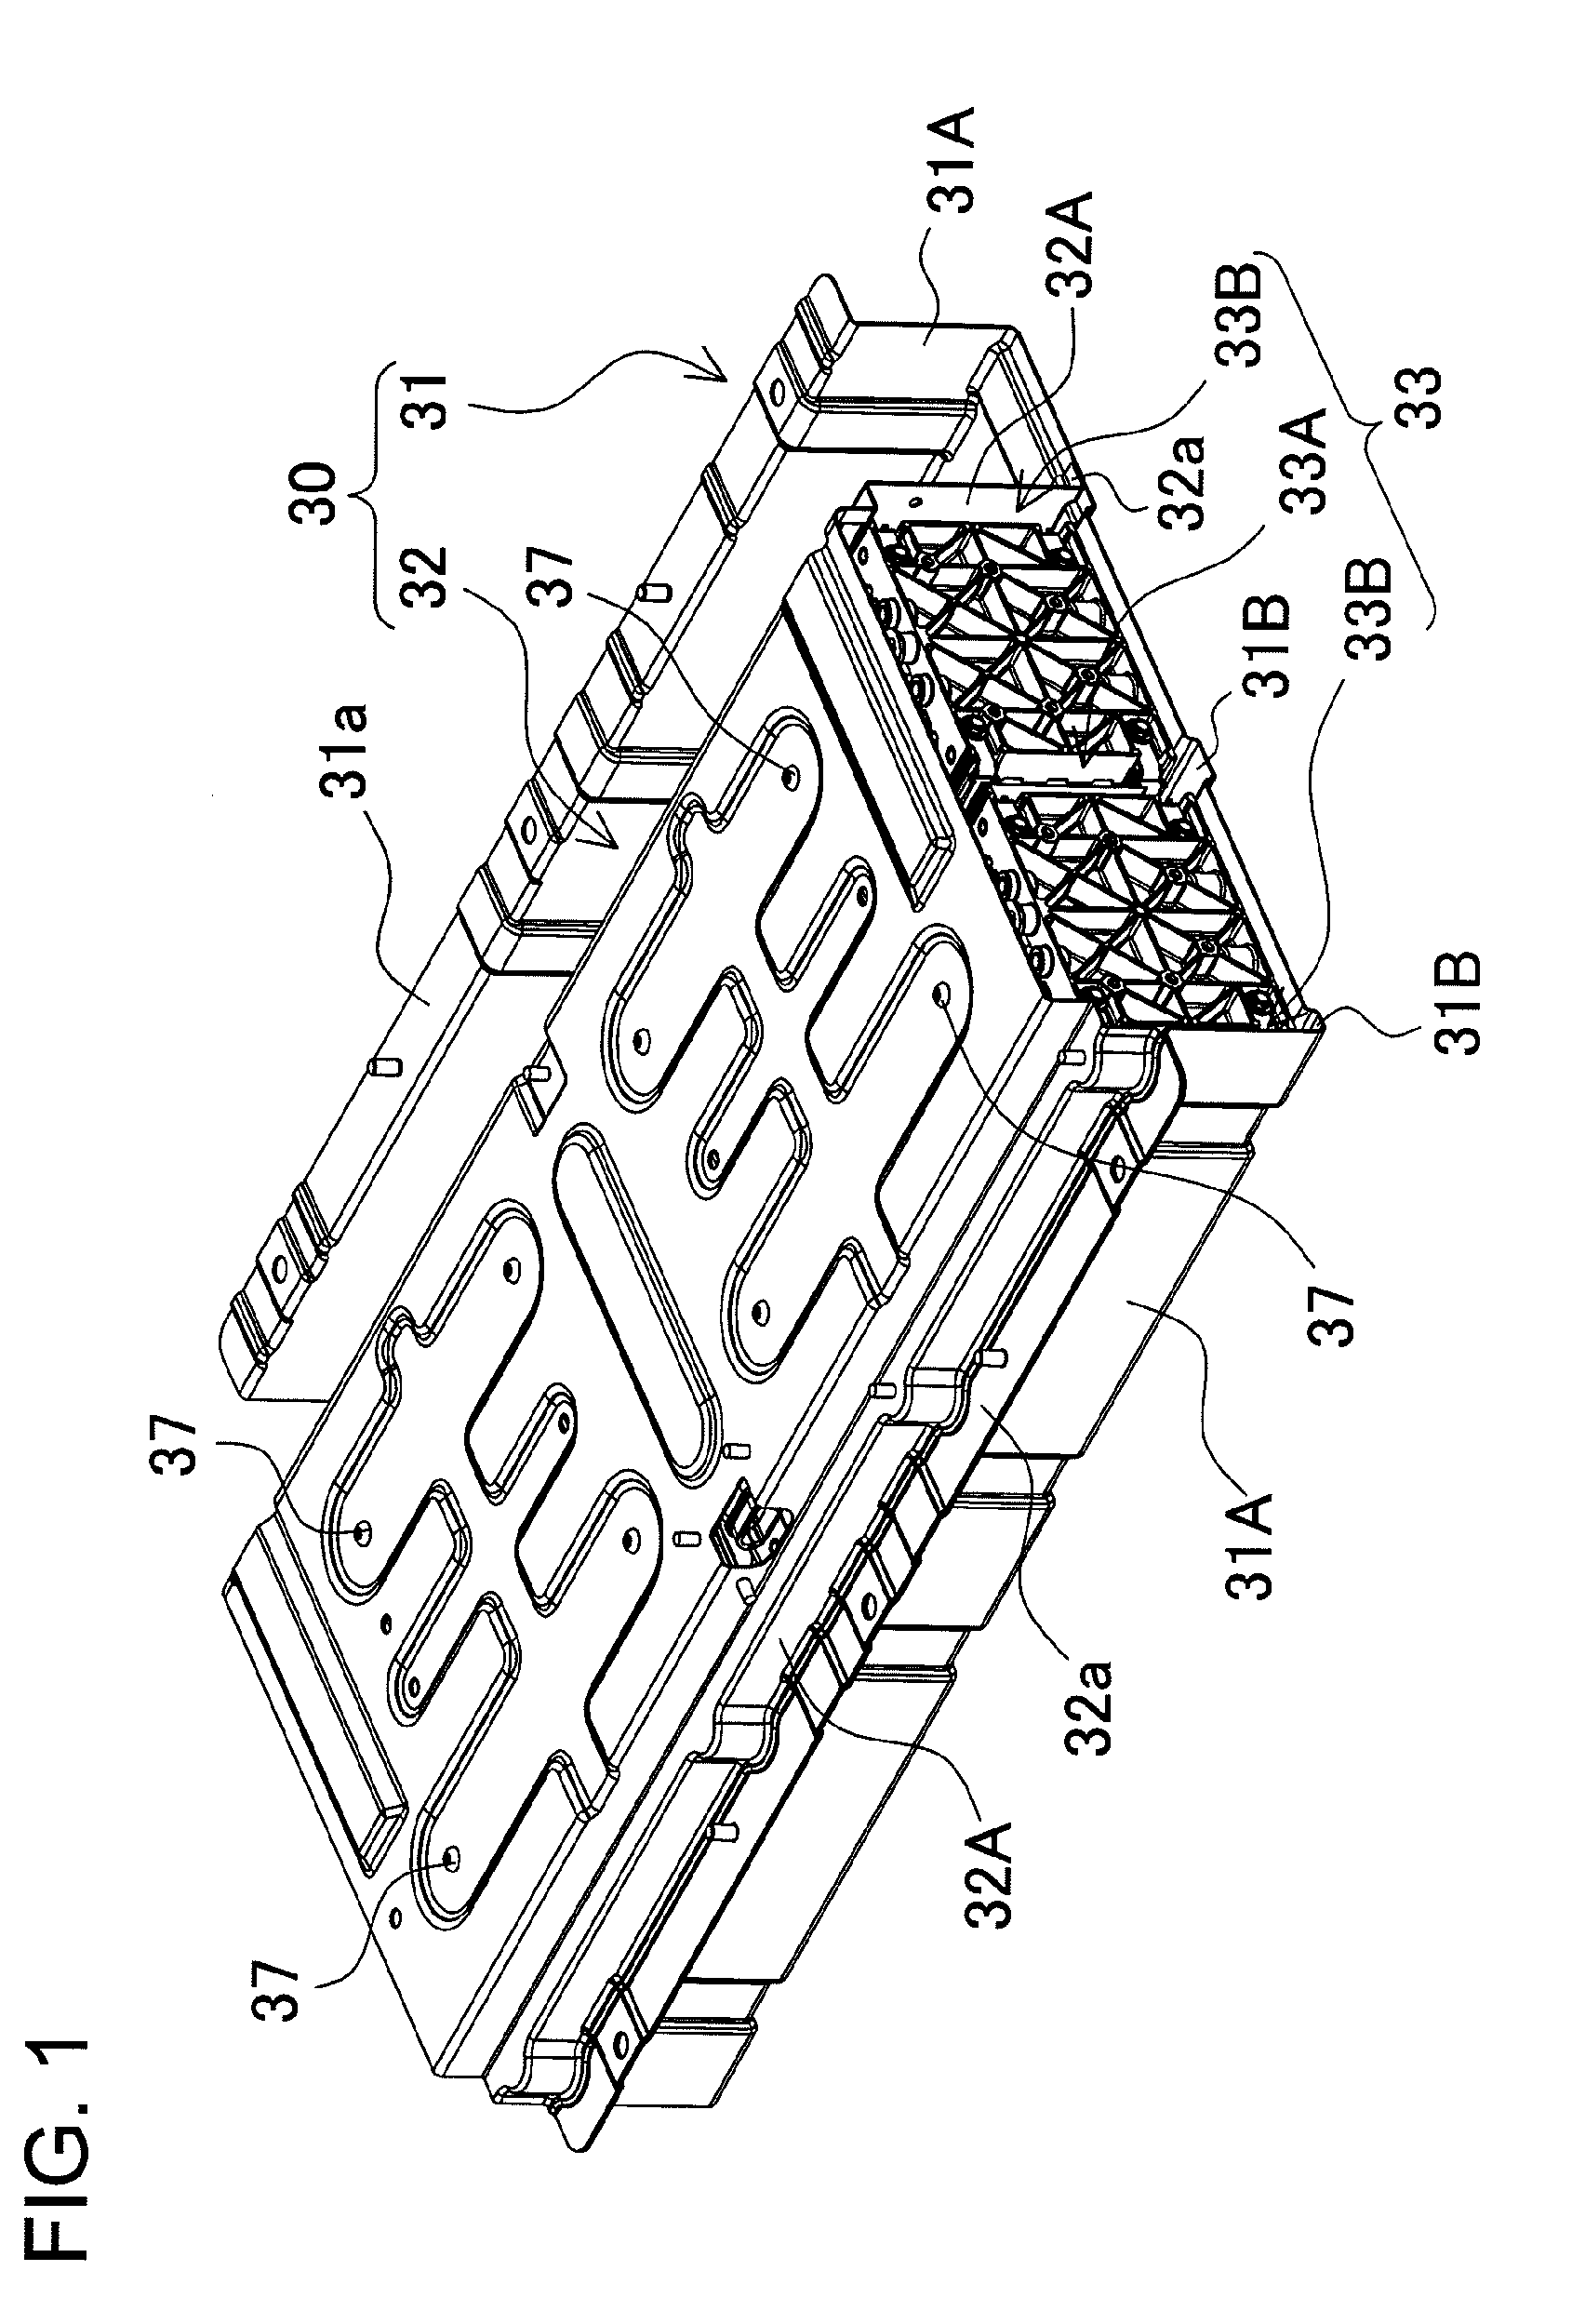 Battery system with exhaust ducts